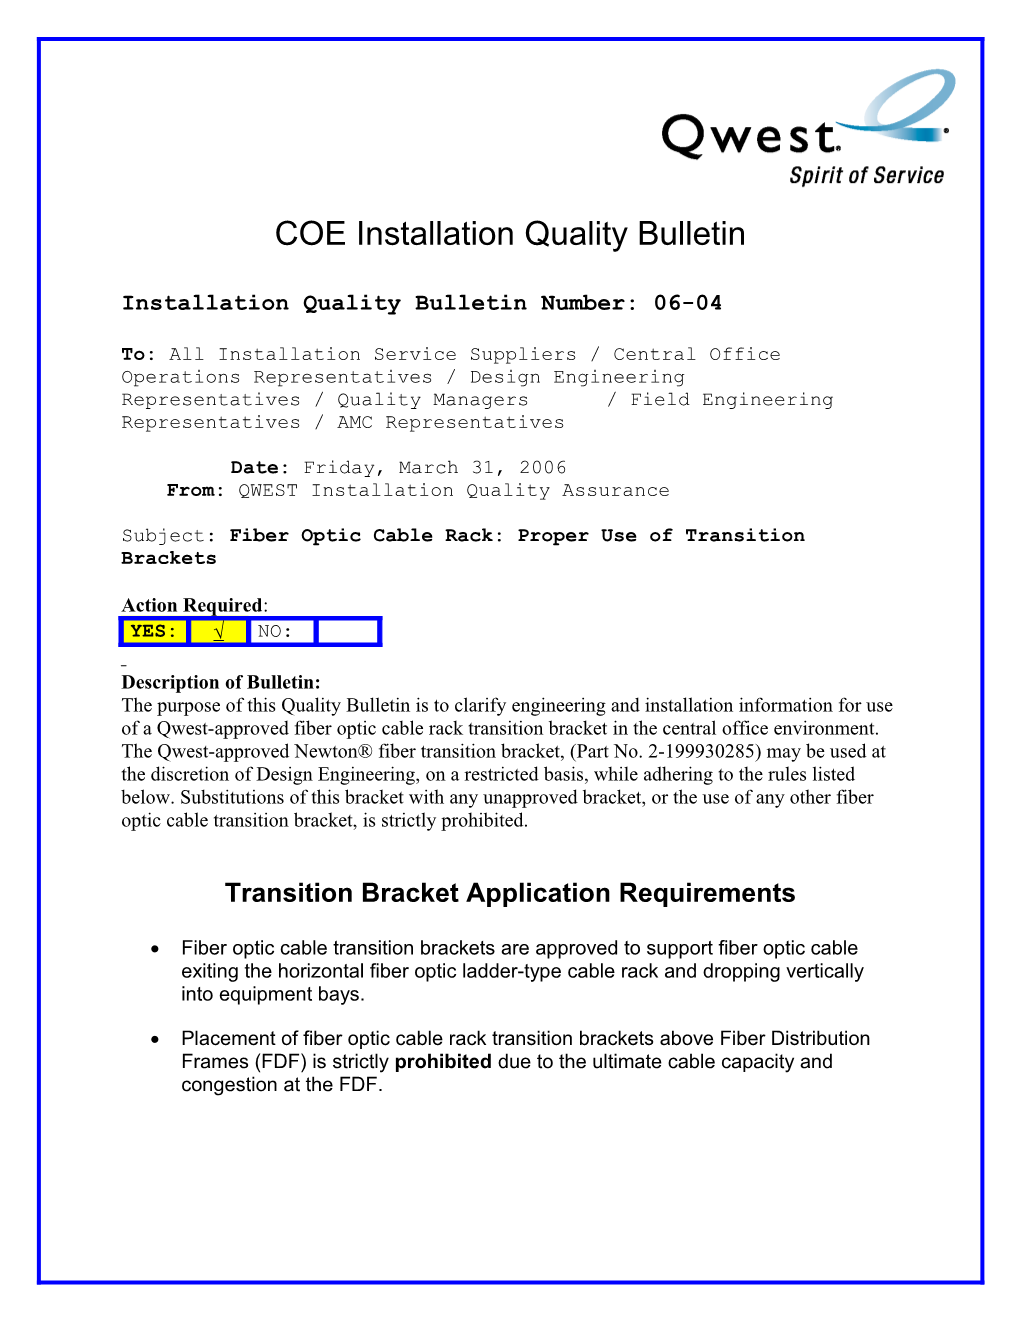 Installation Quality Bulletin Number: 06-04